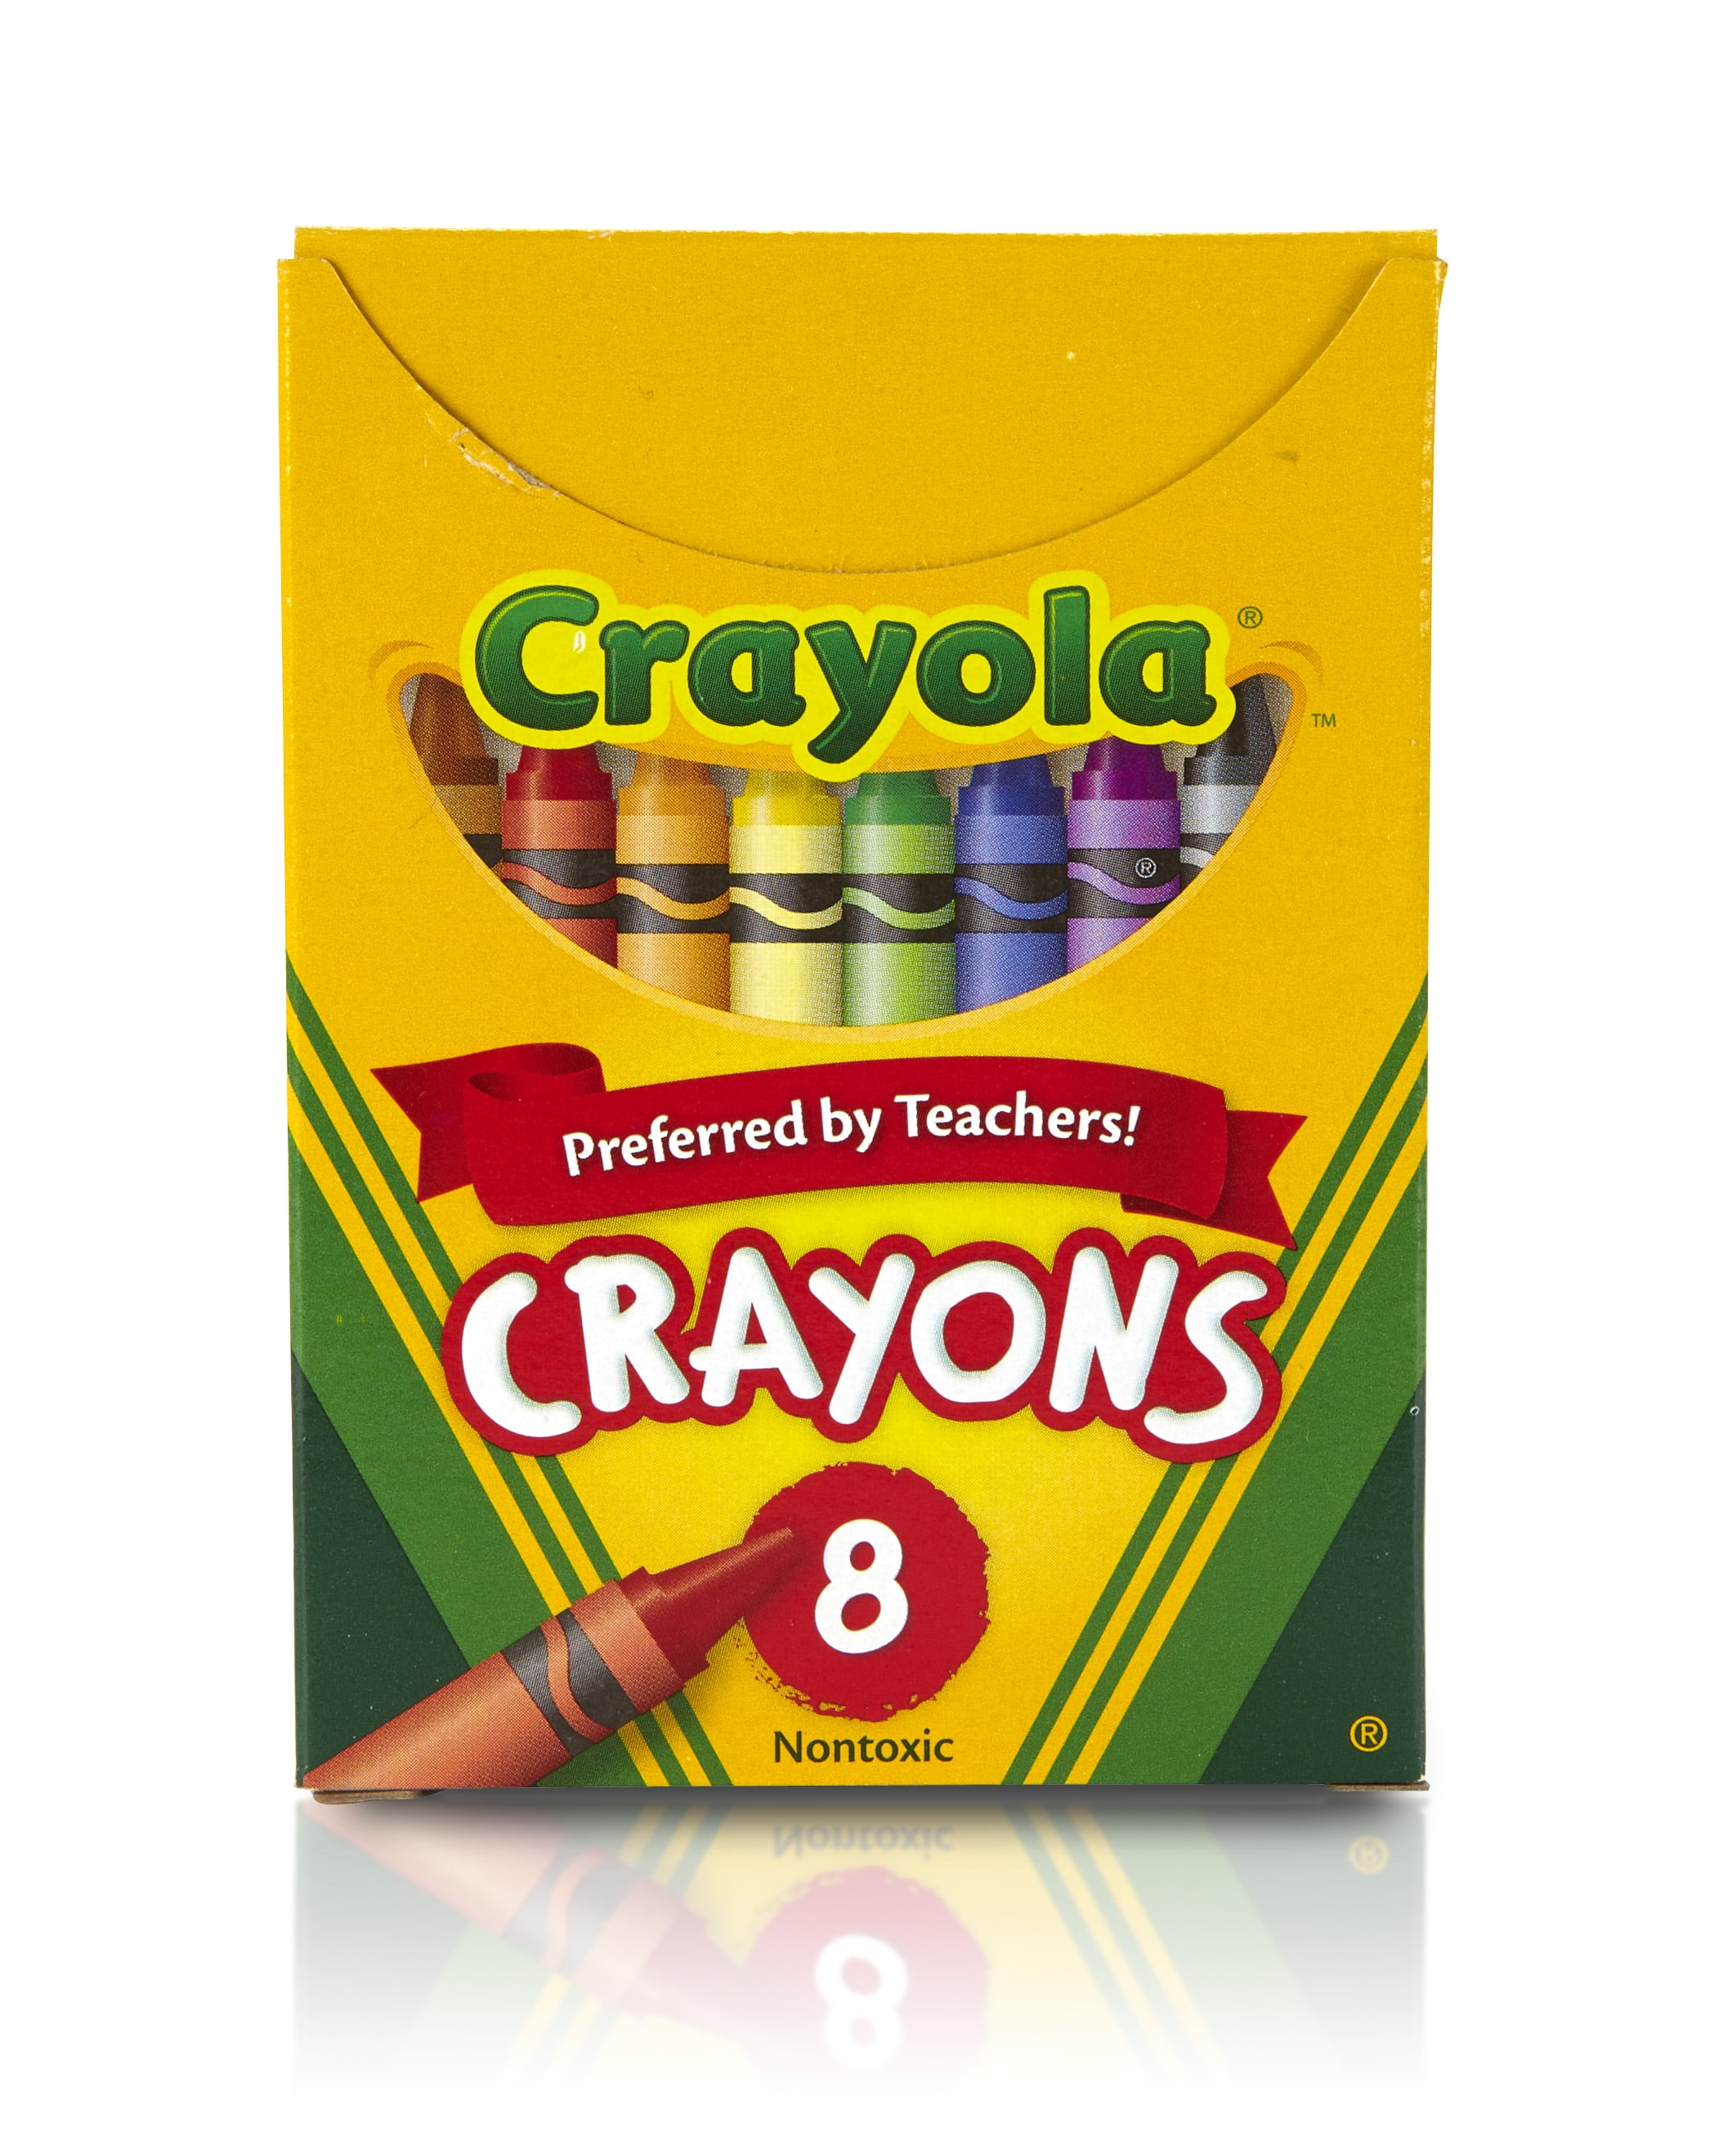 48 Crayola Crayons 4-Pack Bundle Glitter Neon Pearl Assorted Classic Colors 